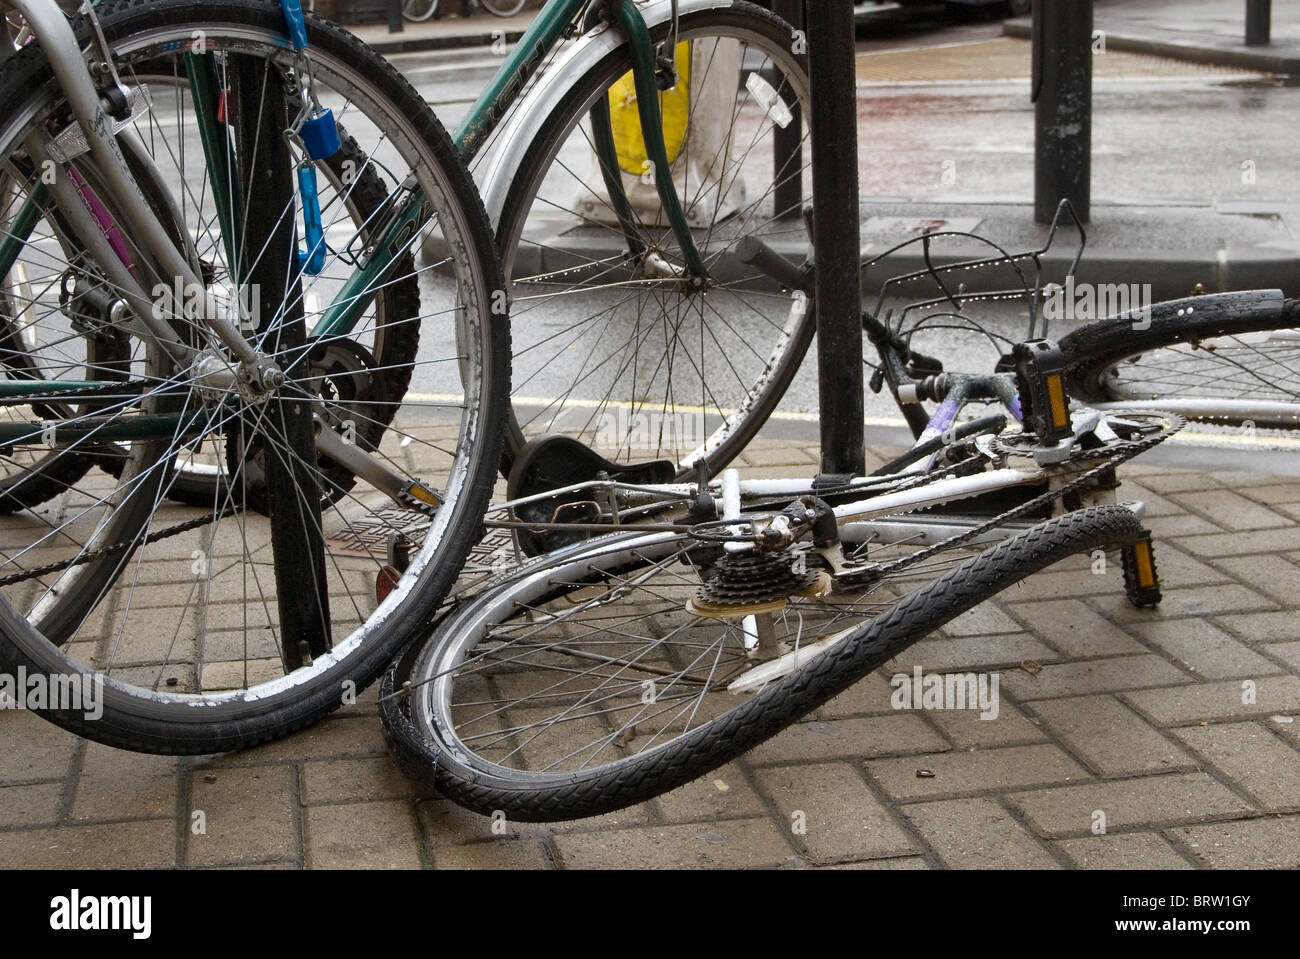 A bicycle that has been vandalised lying on a Cambridge street Stock Photo